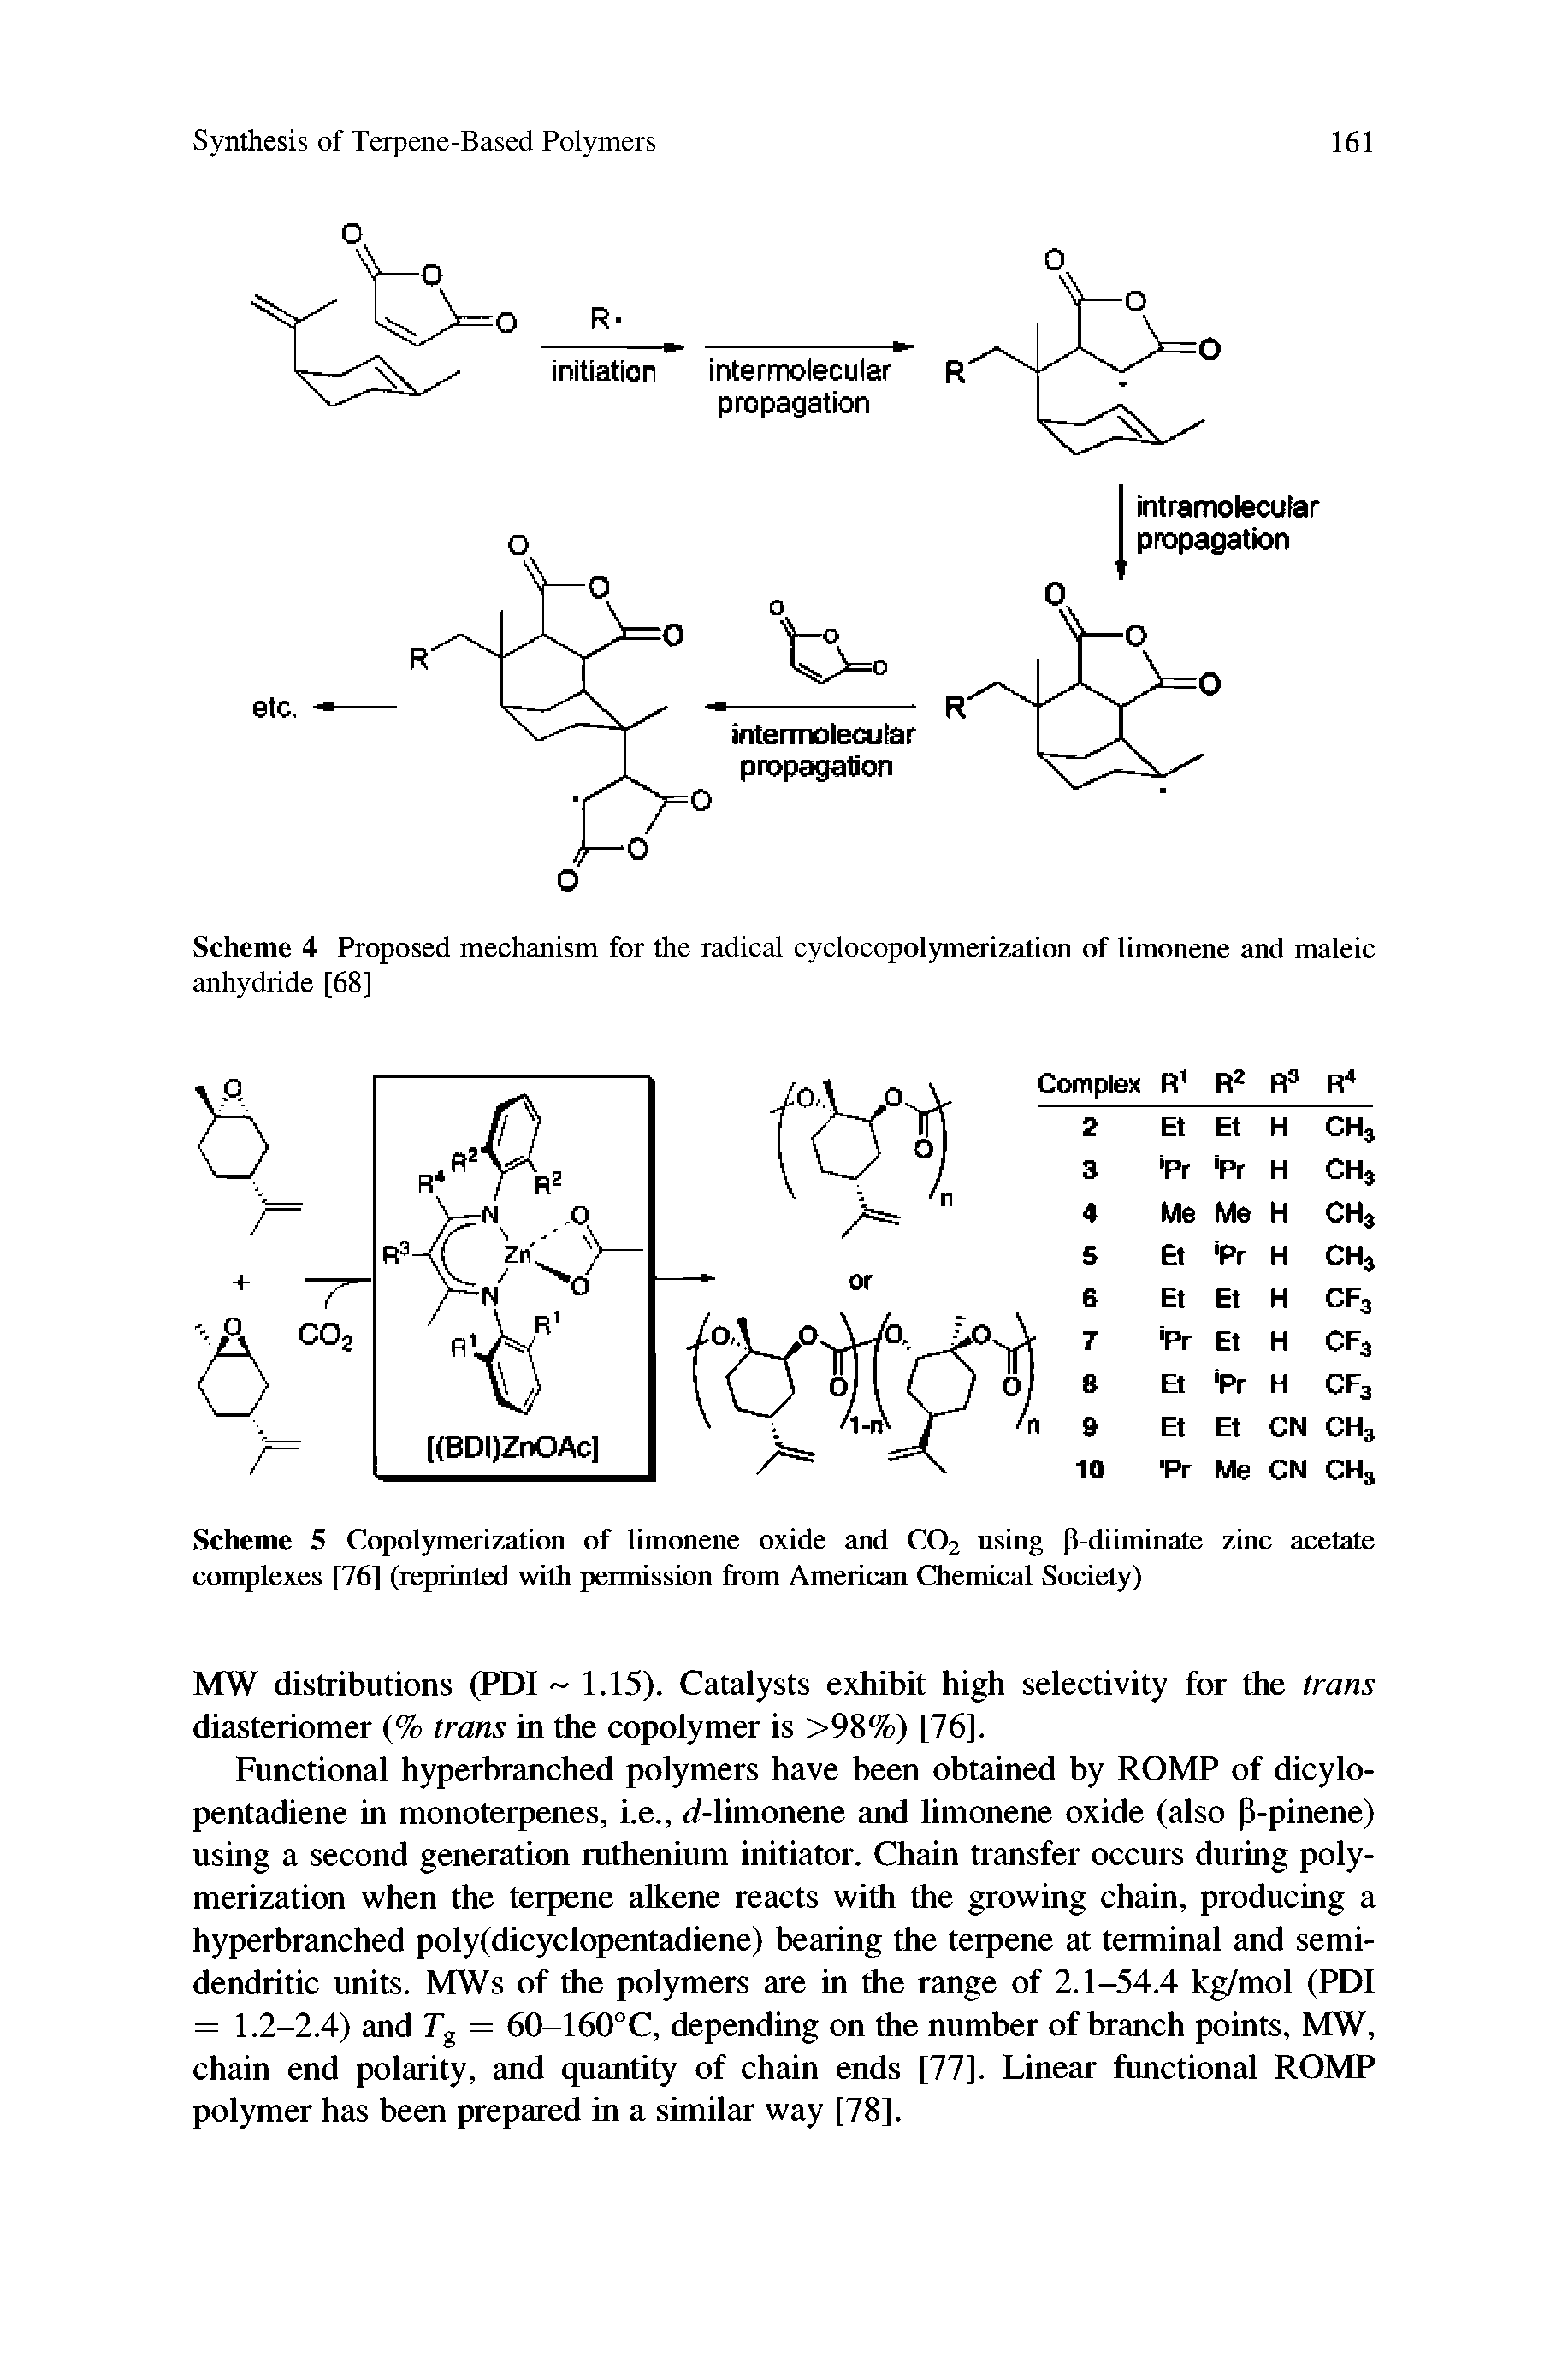 Scheme 5 Copolymerization of limonene oxide and CO2 using P-diiminate zinc acetate complexes [76] (reprinted with permission from American Chemical Society)...